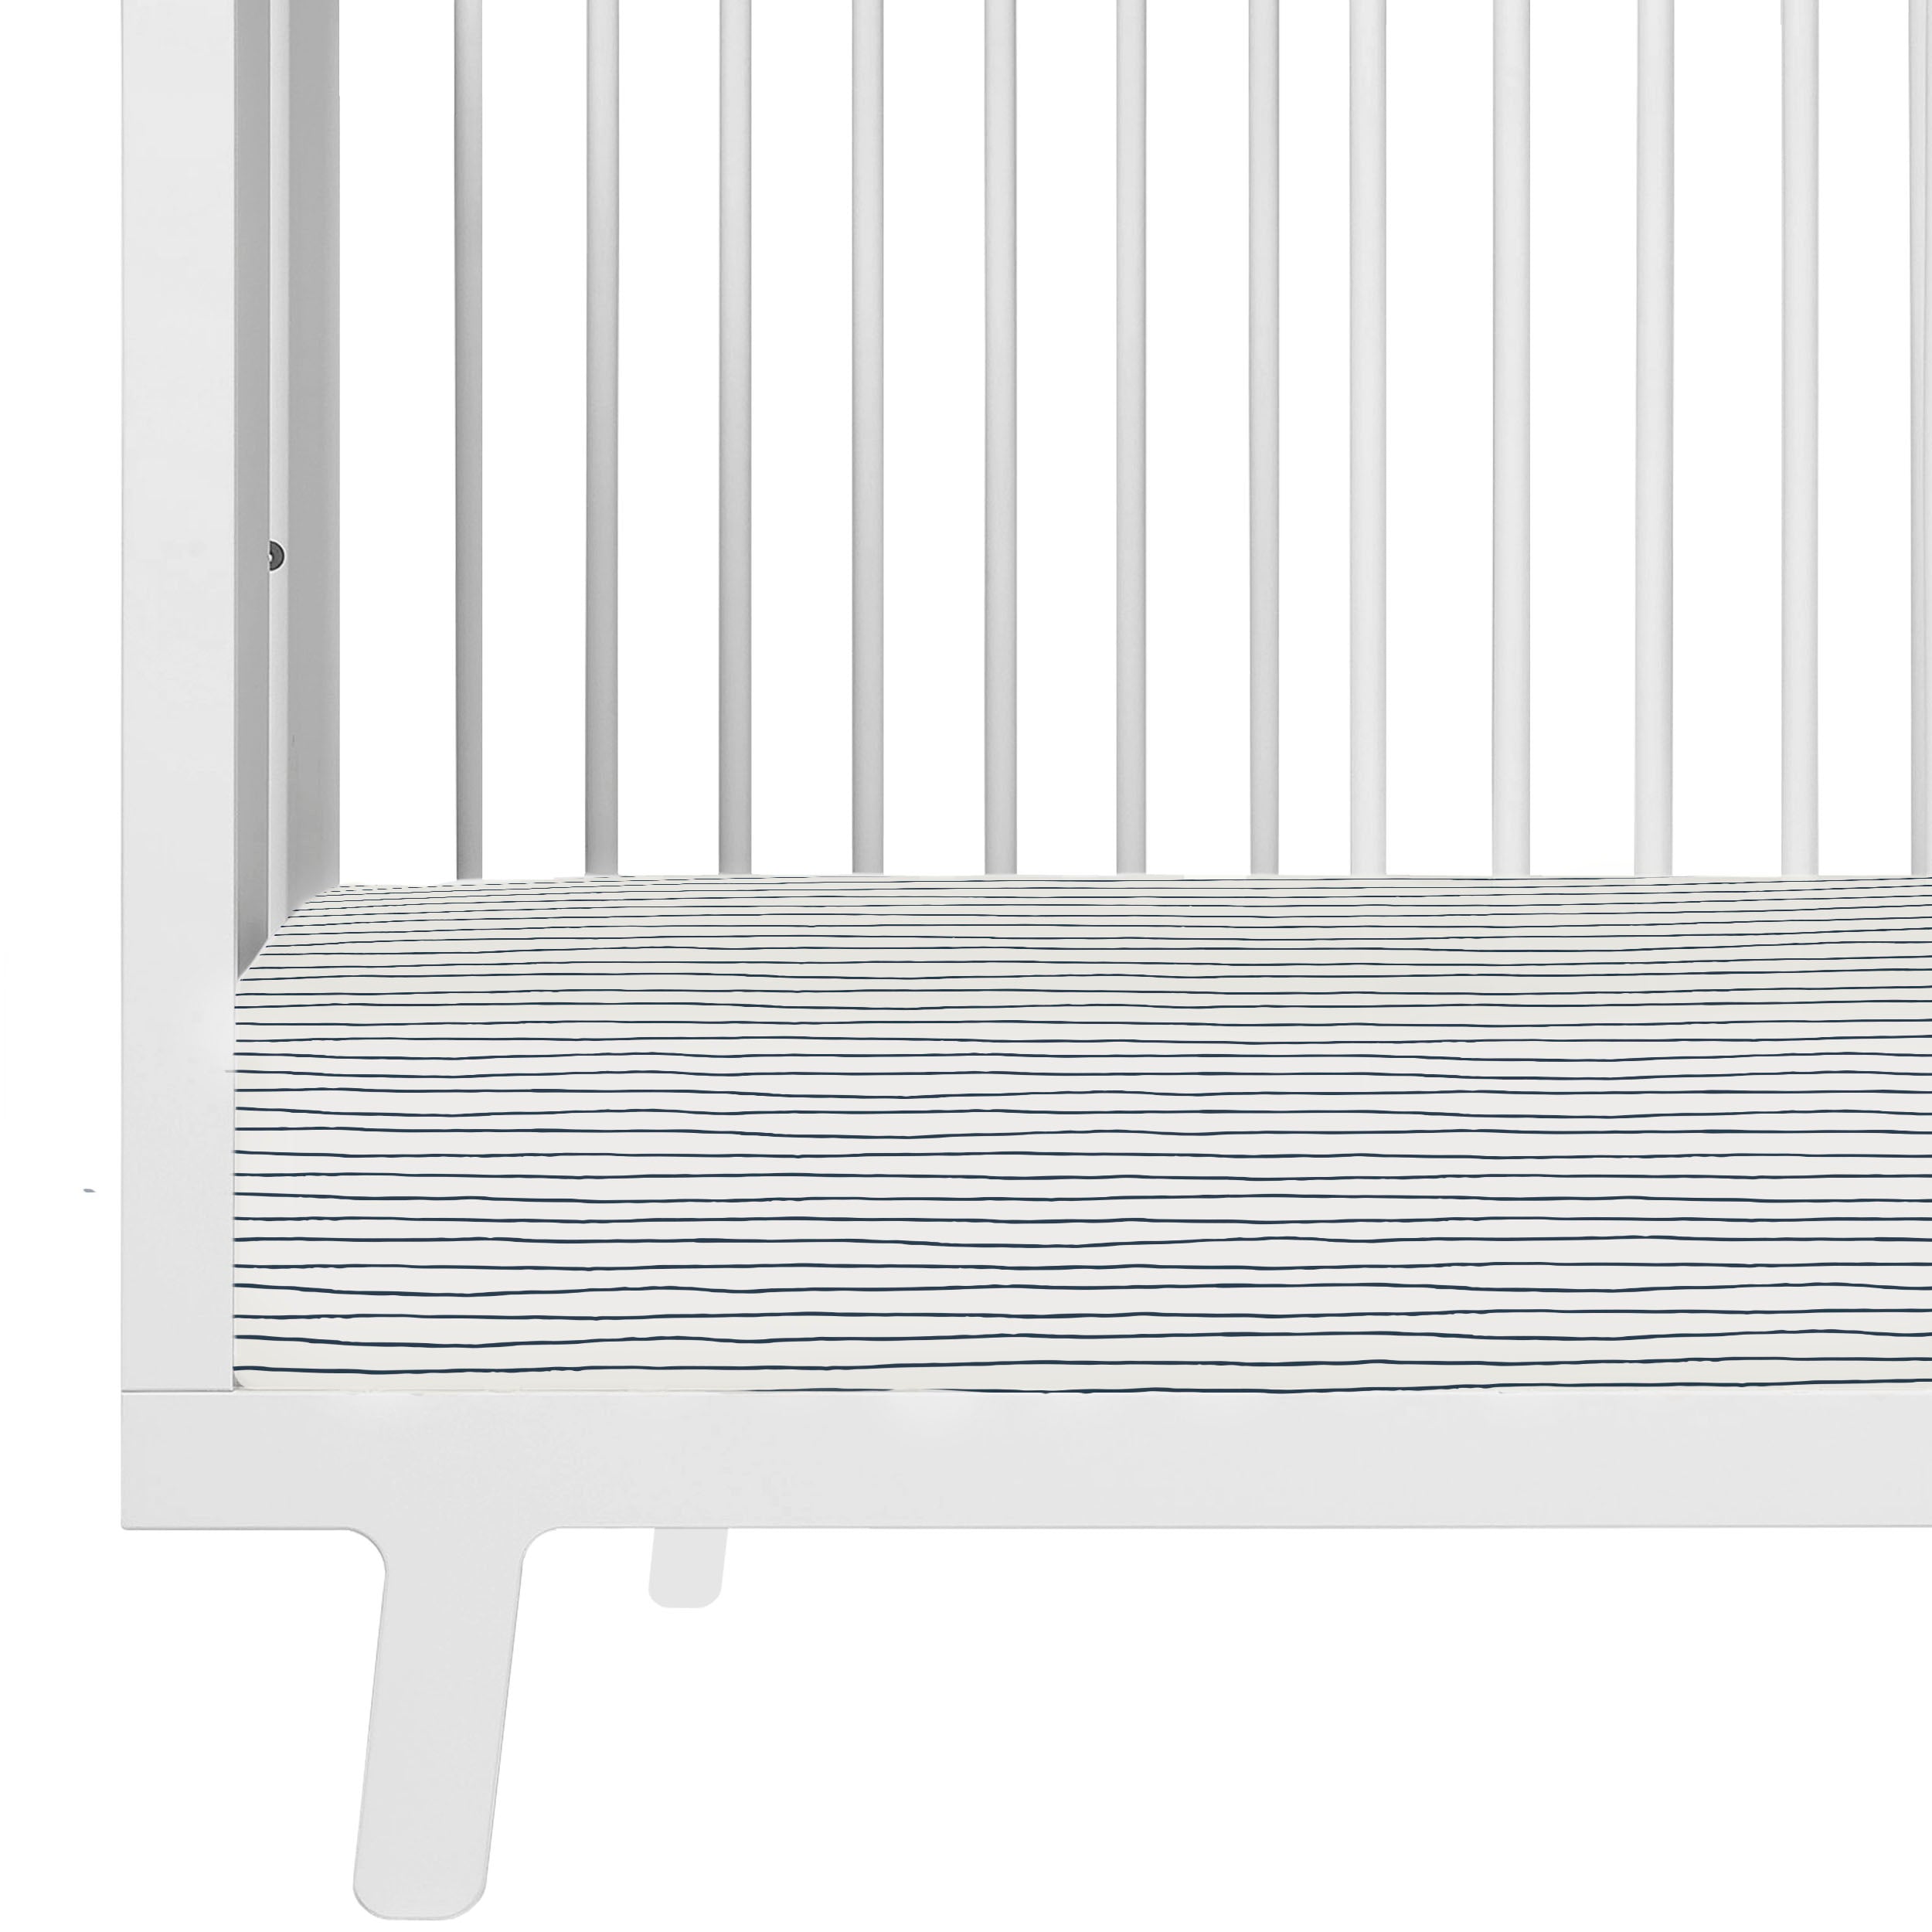 Close-up of a white Makemake Organics baby crib with a Cobi Blue Stripes fitted sheet and pillowcase visible through the vertical slats. The crib showcases a clean, modern design with a single visible leg.